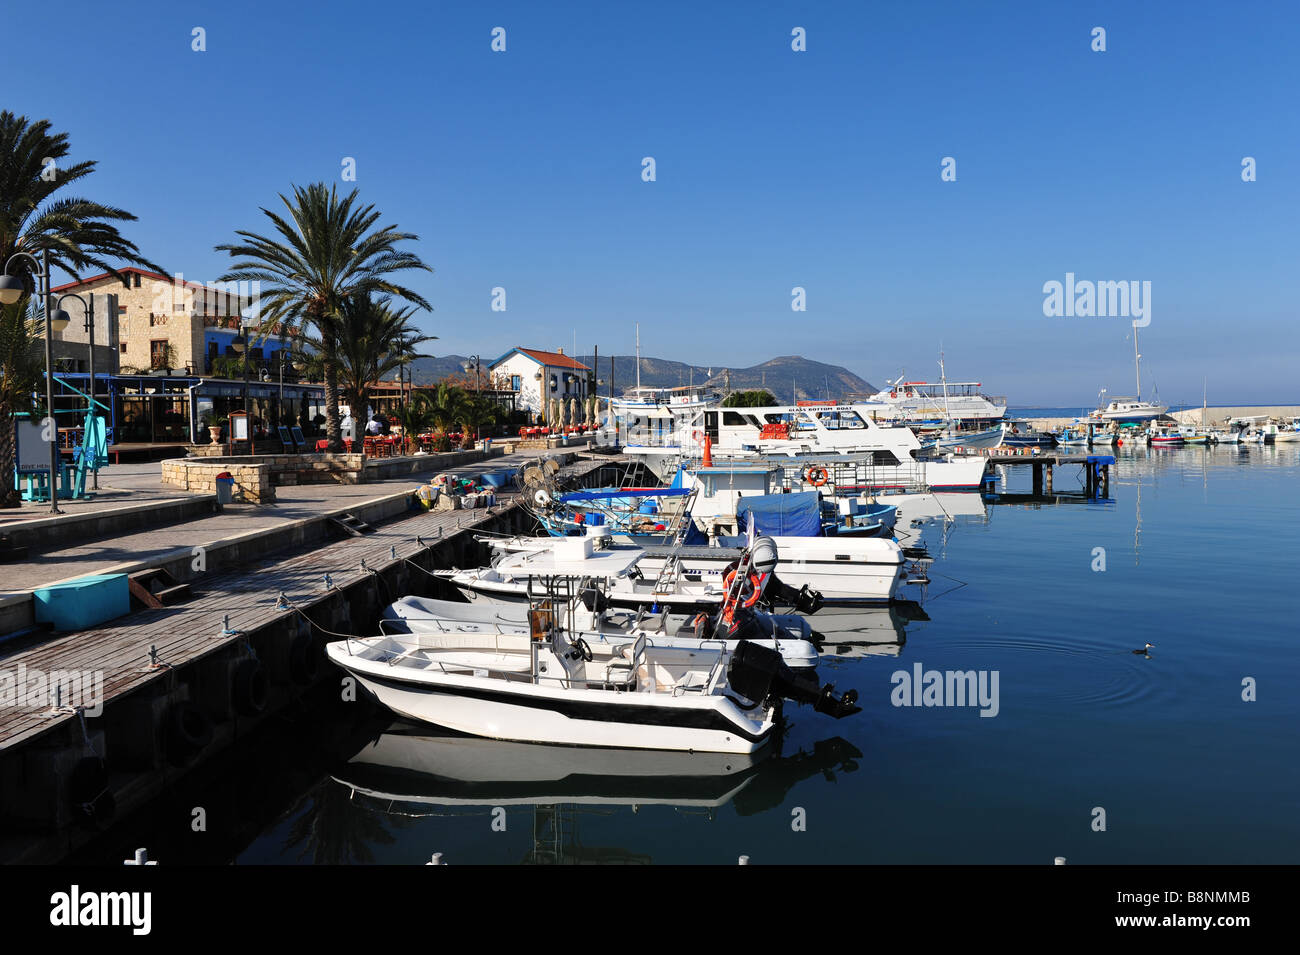 Peaceful scene in Latchi harbour in Cyprus Stock Photo